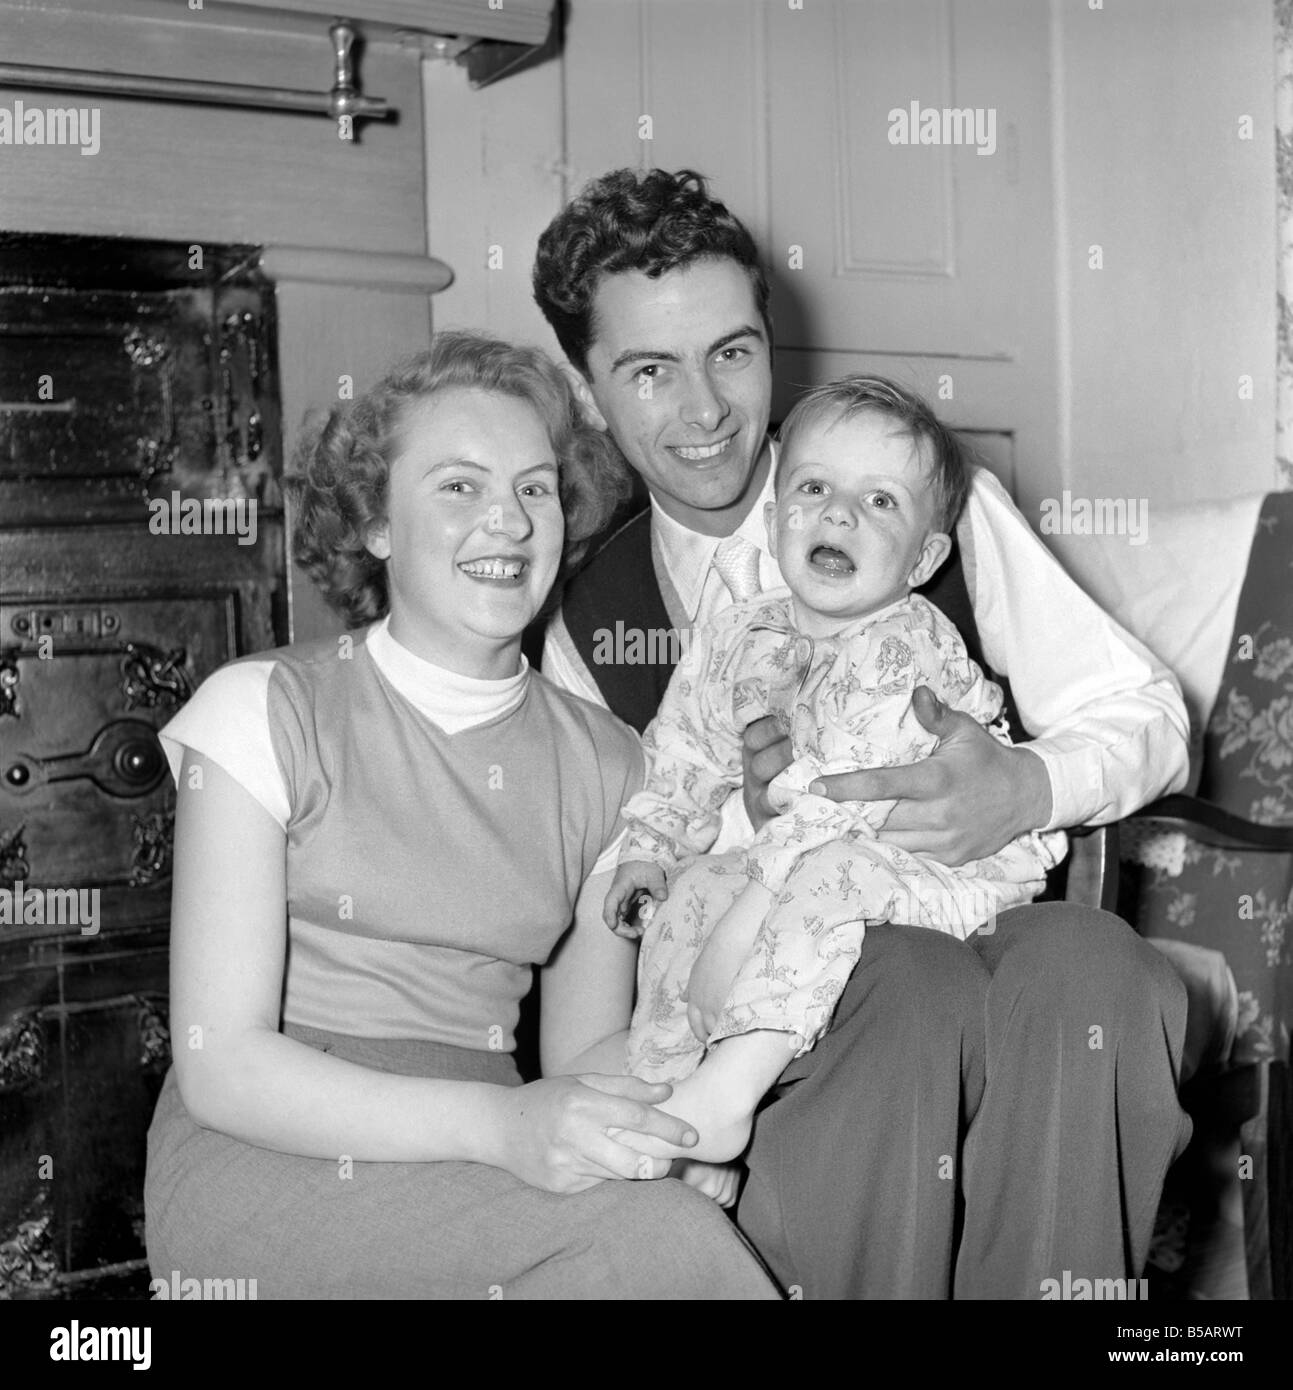 Family life: Mr. and Mrs. Hull with their son before giving him tea. 1954 A160-004 Stock Photo